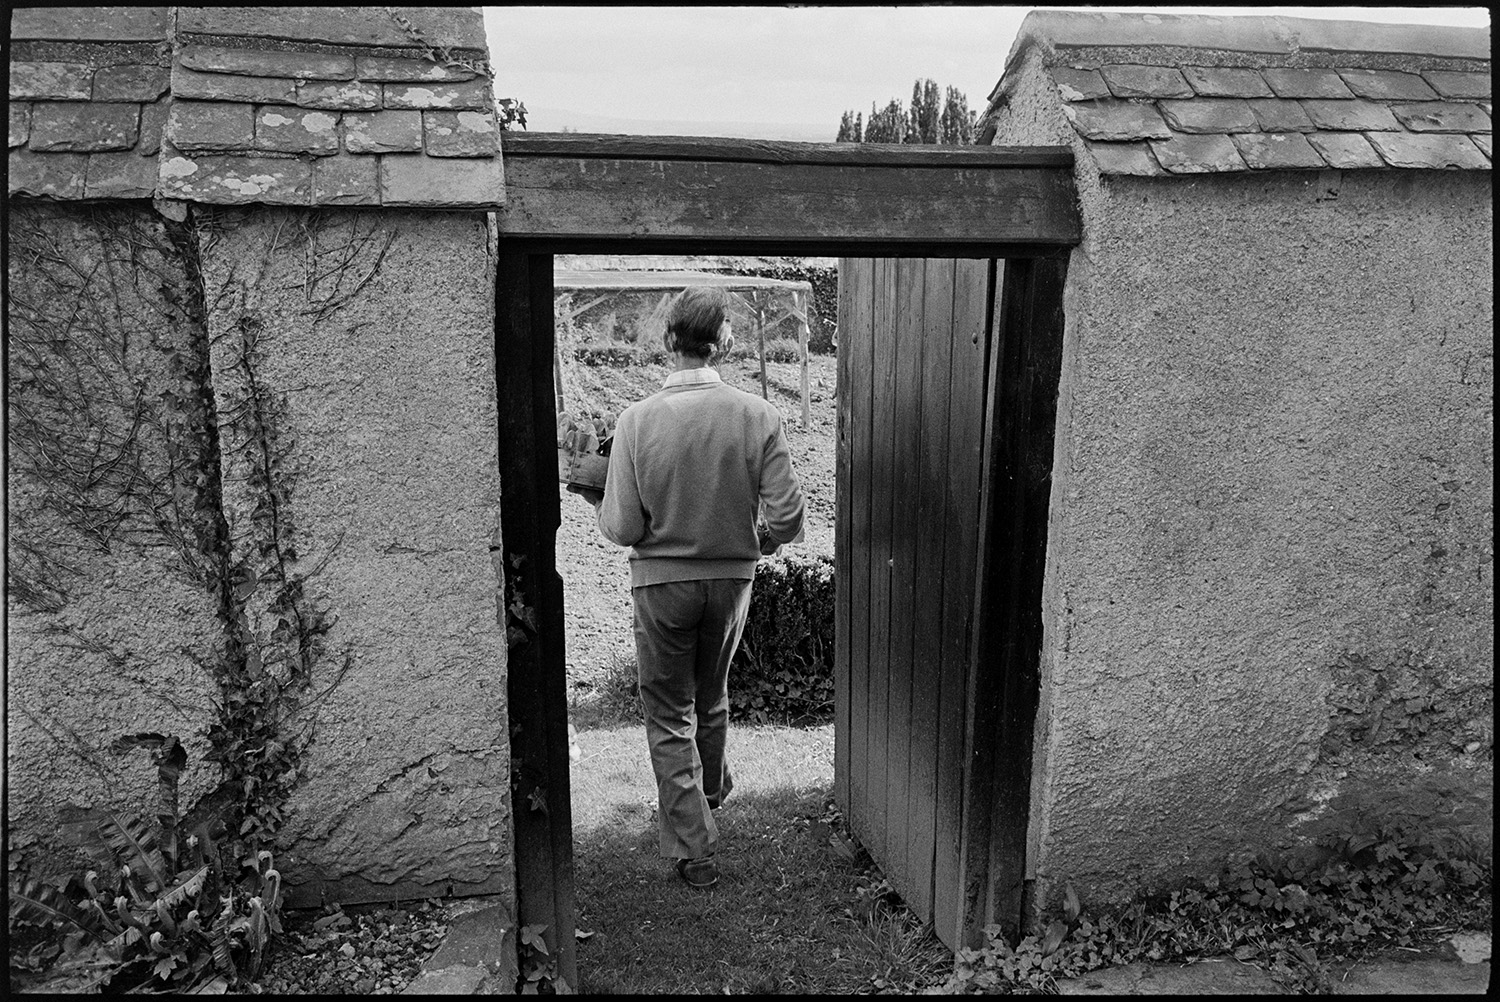 Man planting spring vegetables in walled garden, view of distant hills, Dartmoor. <br />
[A man walking through the entrance of a walled garden to plant spring vegetables at The Old Rectory, Merton. A netted fruit cage can be seen through the doorway.]